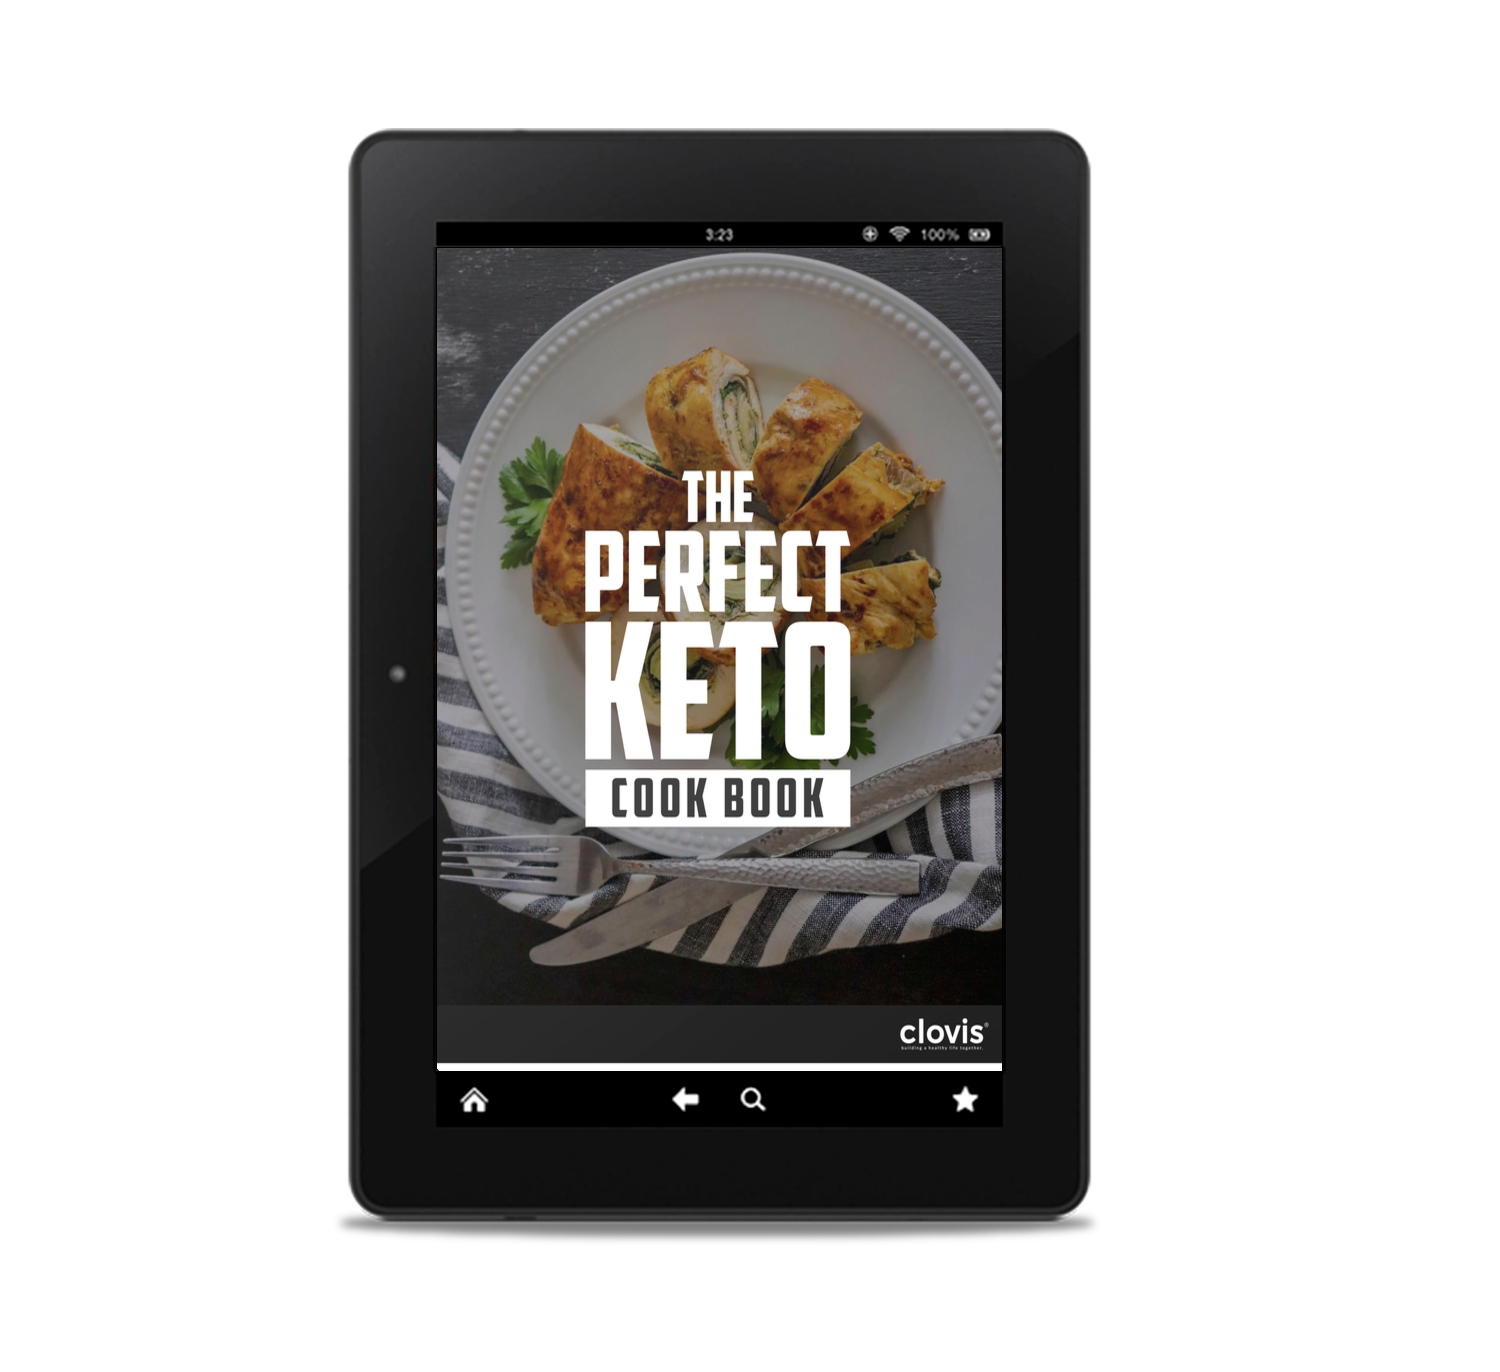 The Perfect Keto Cookbook Review